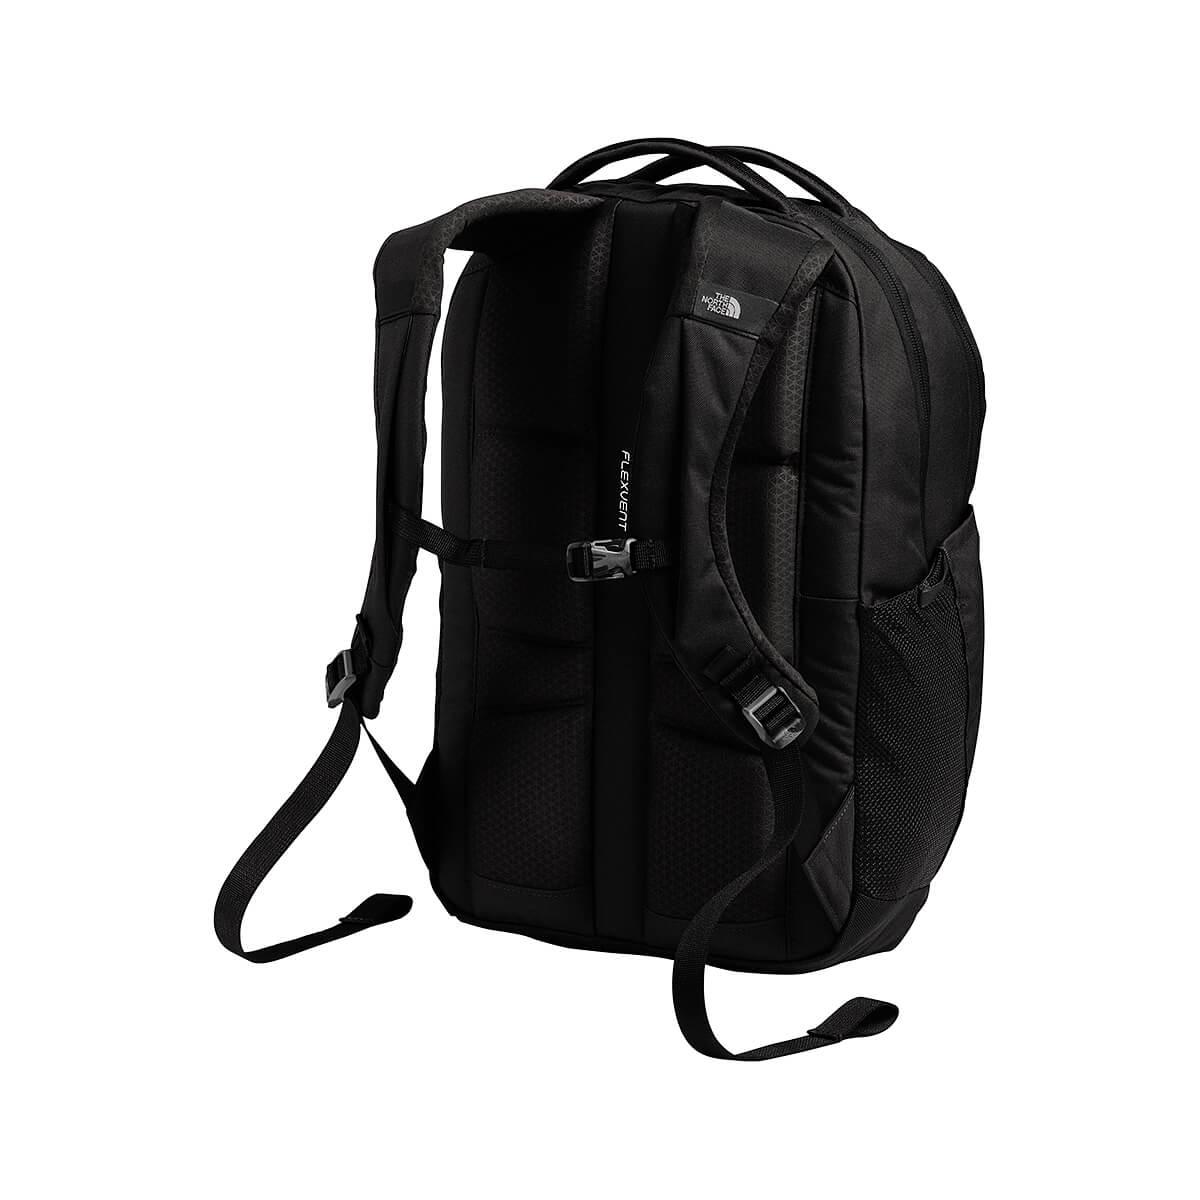 See through Menstruation Alabama THE NORTH FACE | Women's Vault Backpack